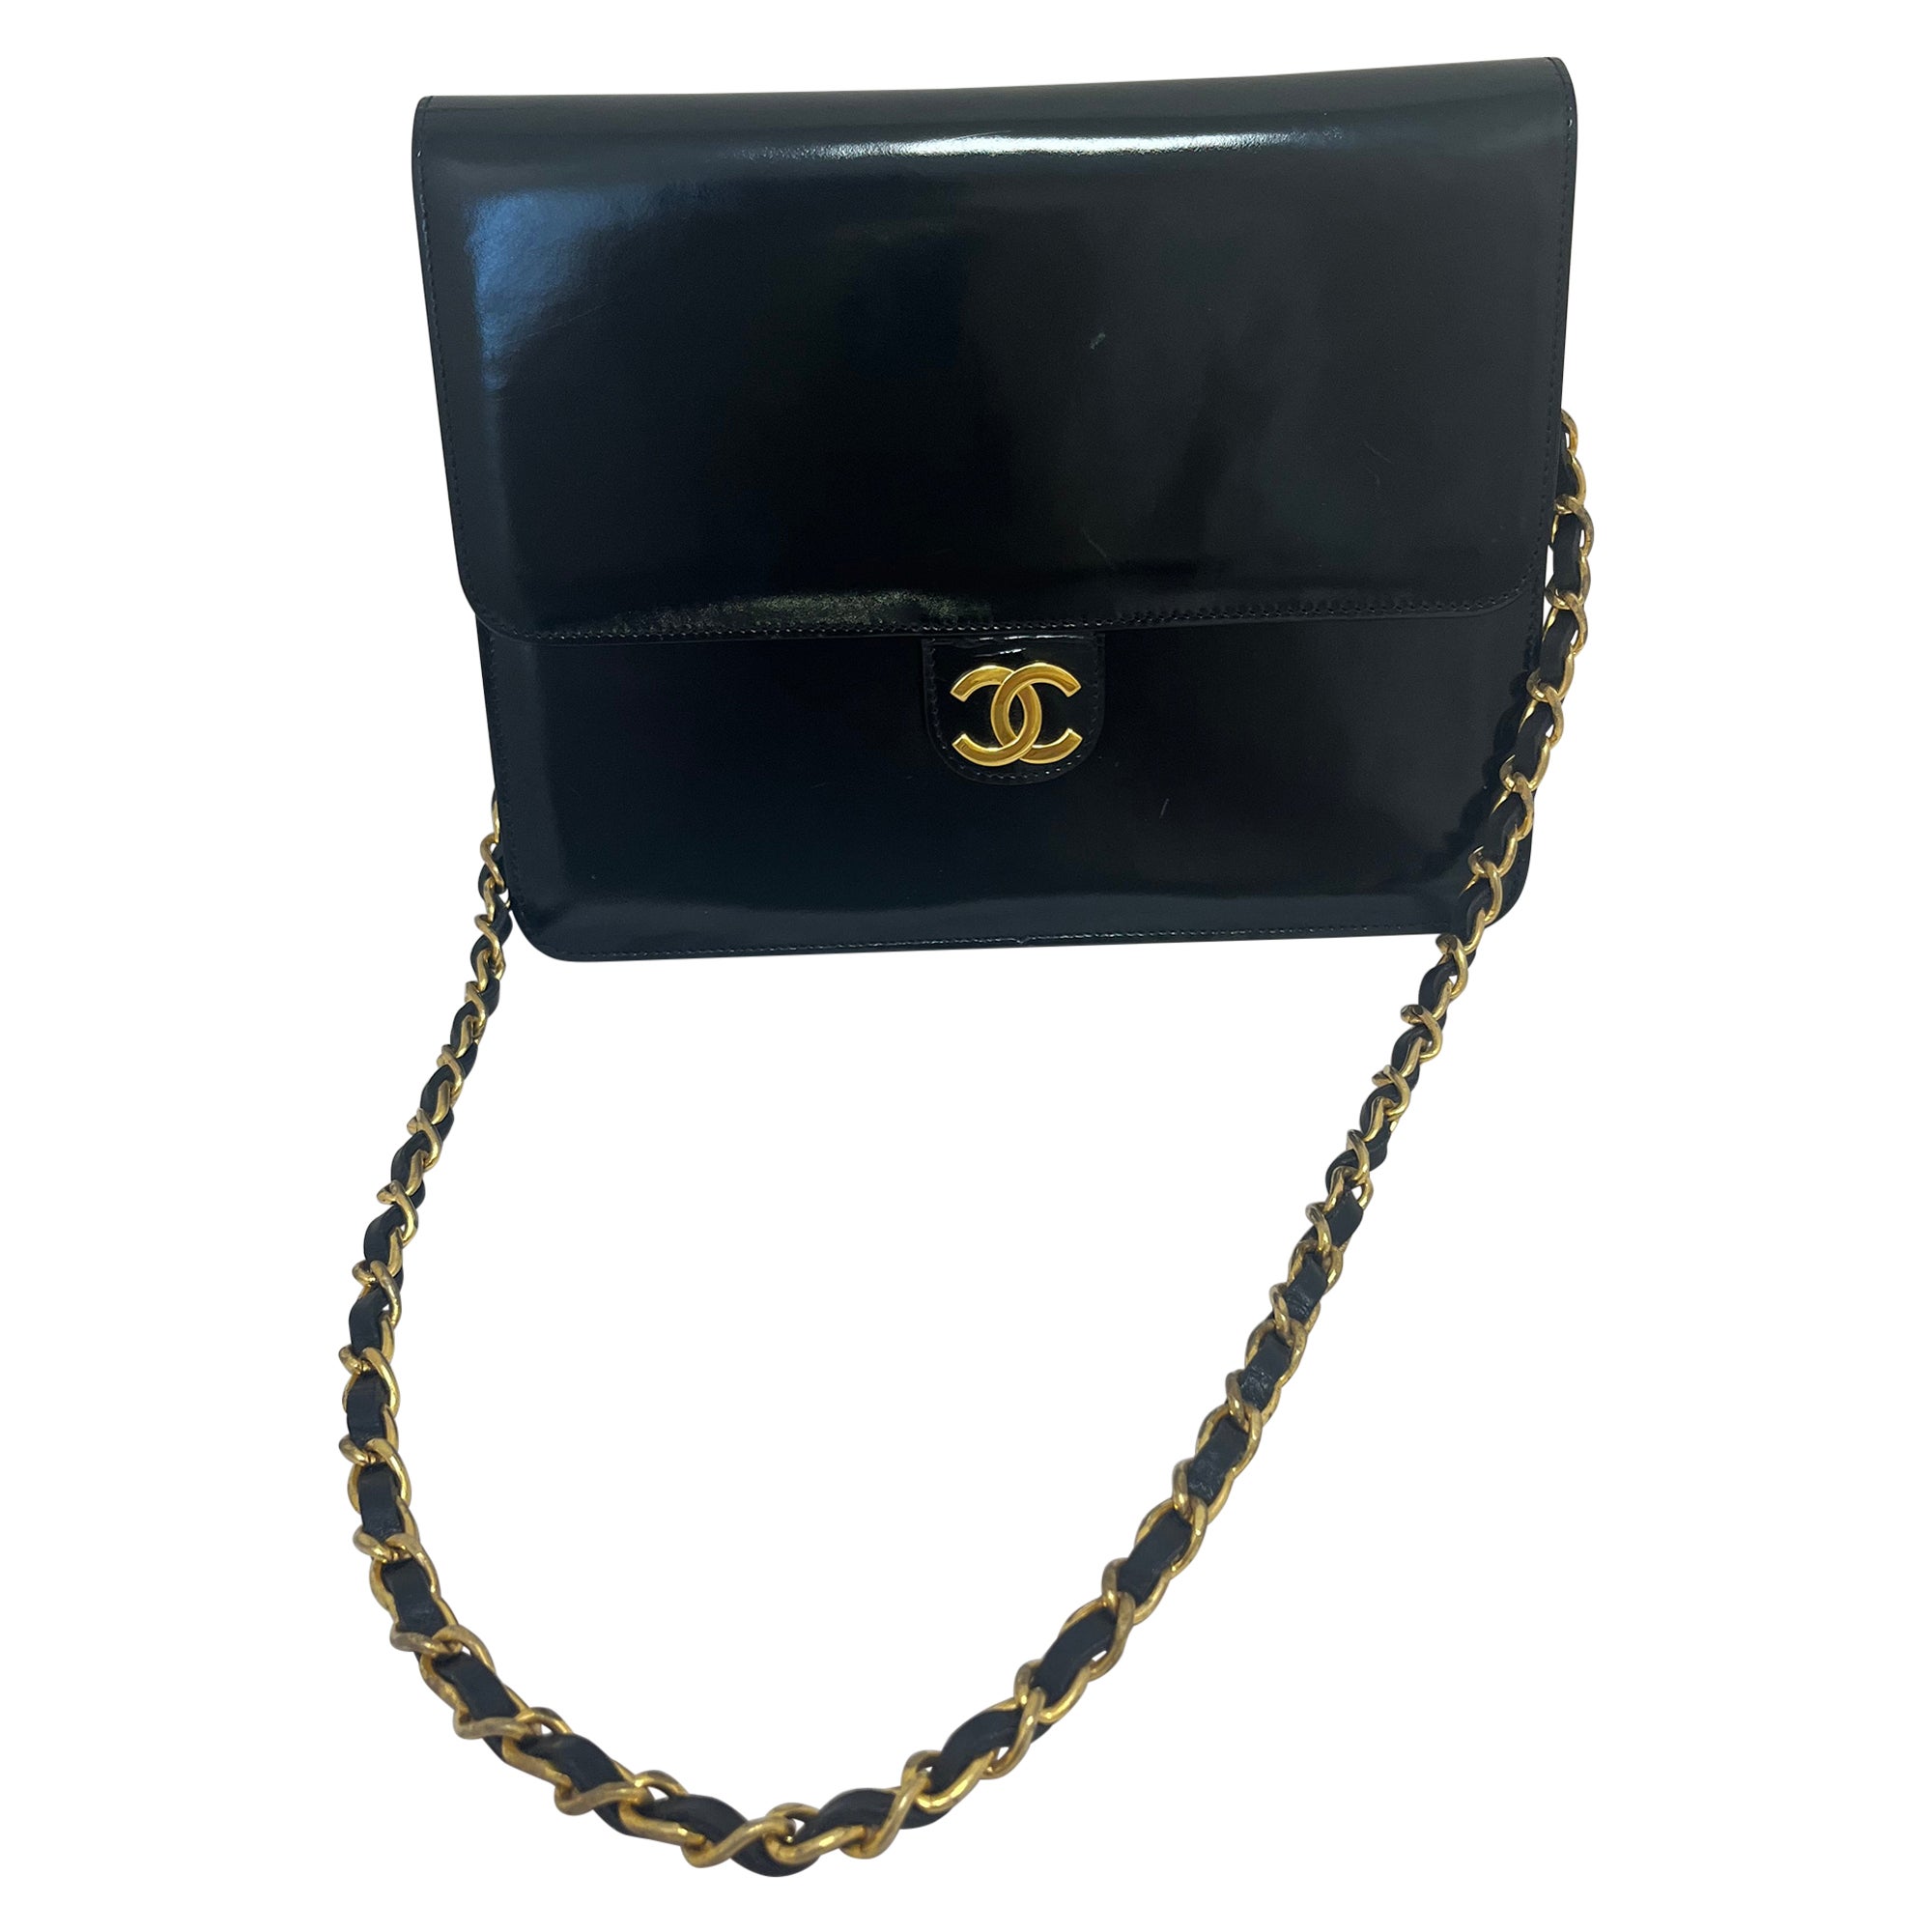 1986-88 Chanel Black Patent Leather Handbag w/COA and Card For Sale